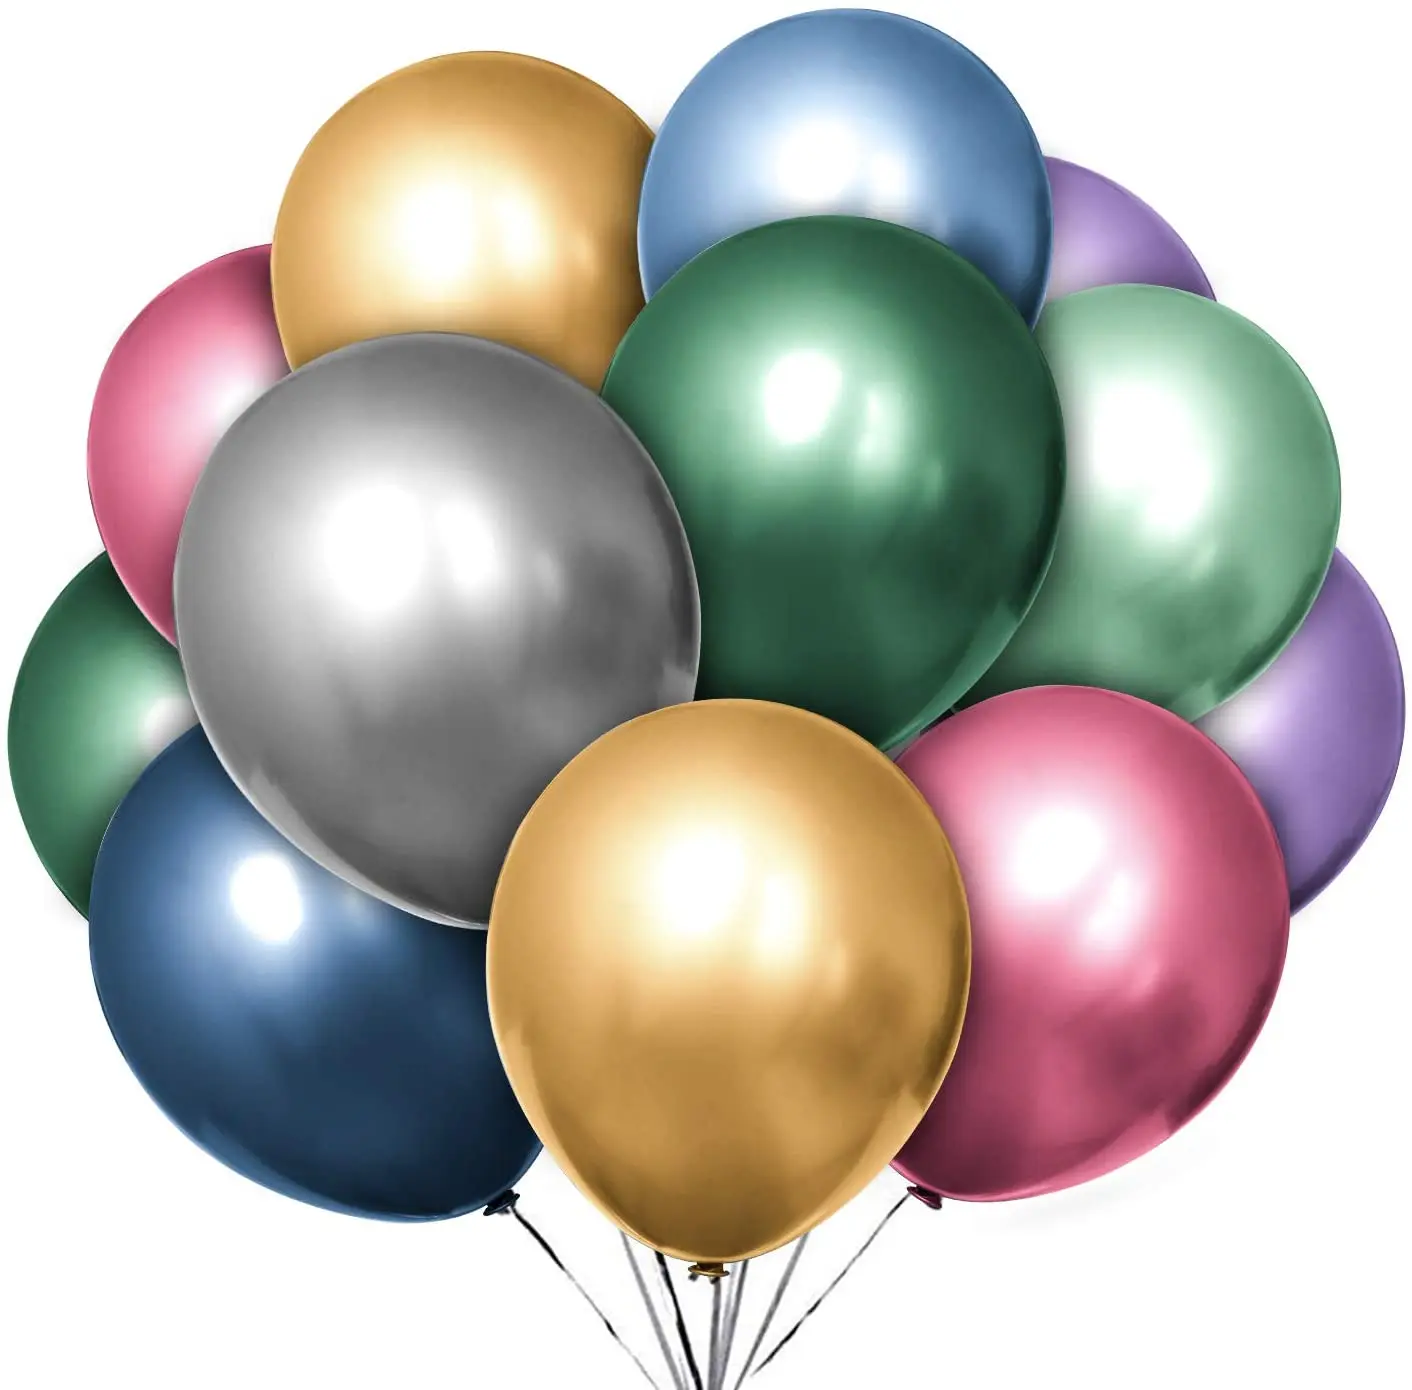 LOTS OF WHOLESALE BALLOONS 1000 Latex BULK PRICE JOBLOT Quality Any Occasion 